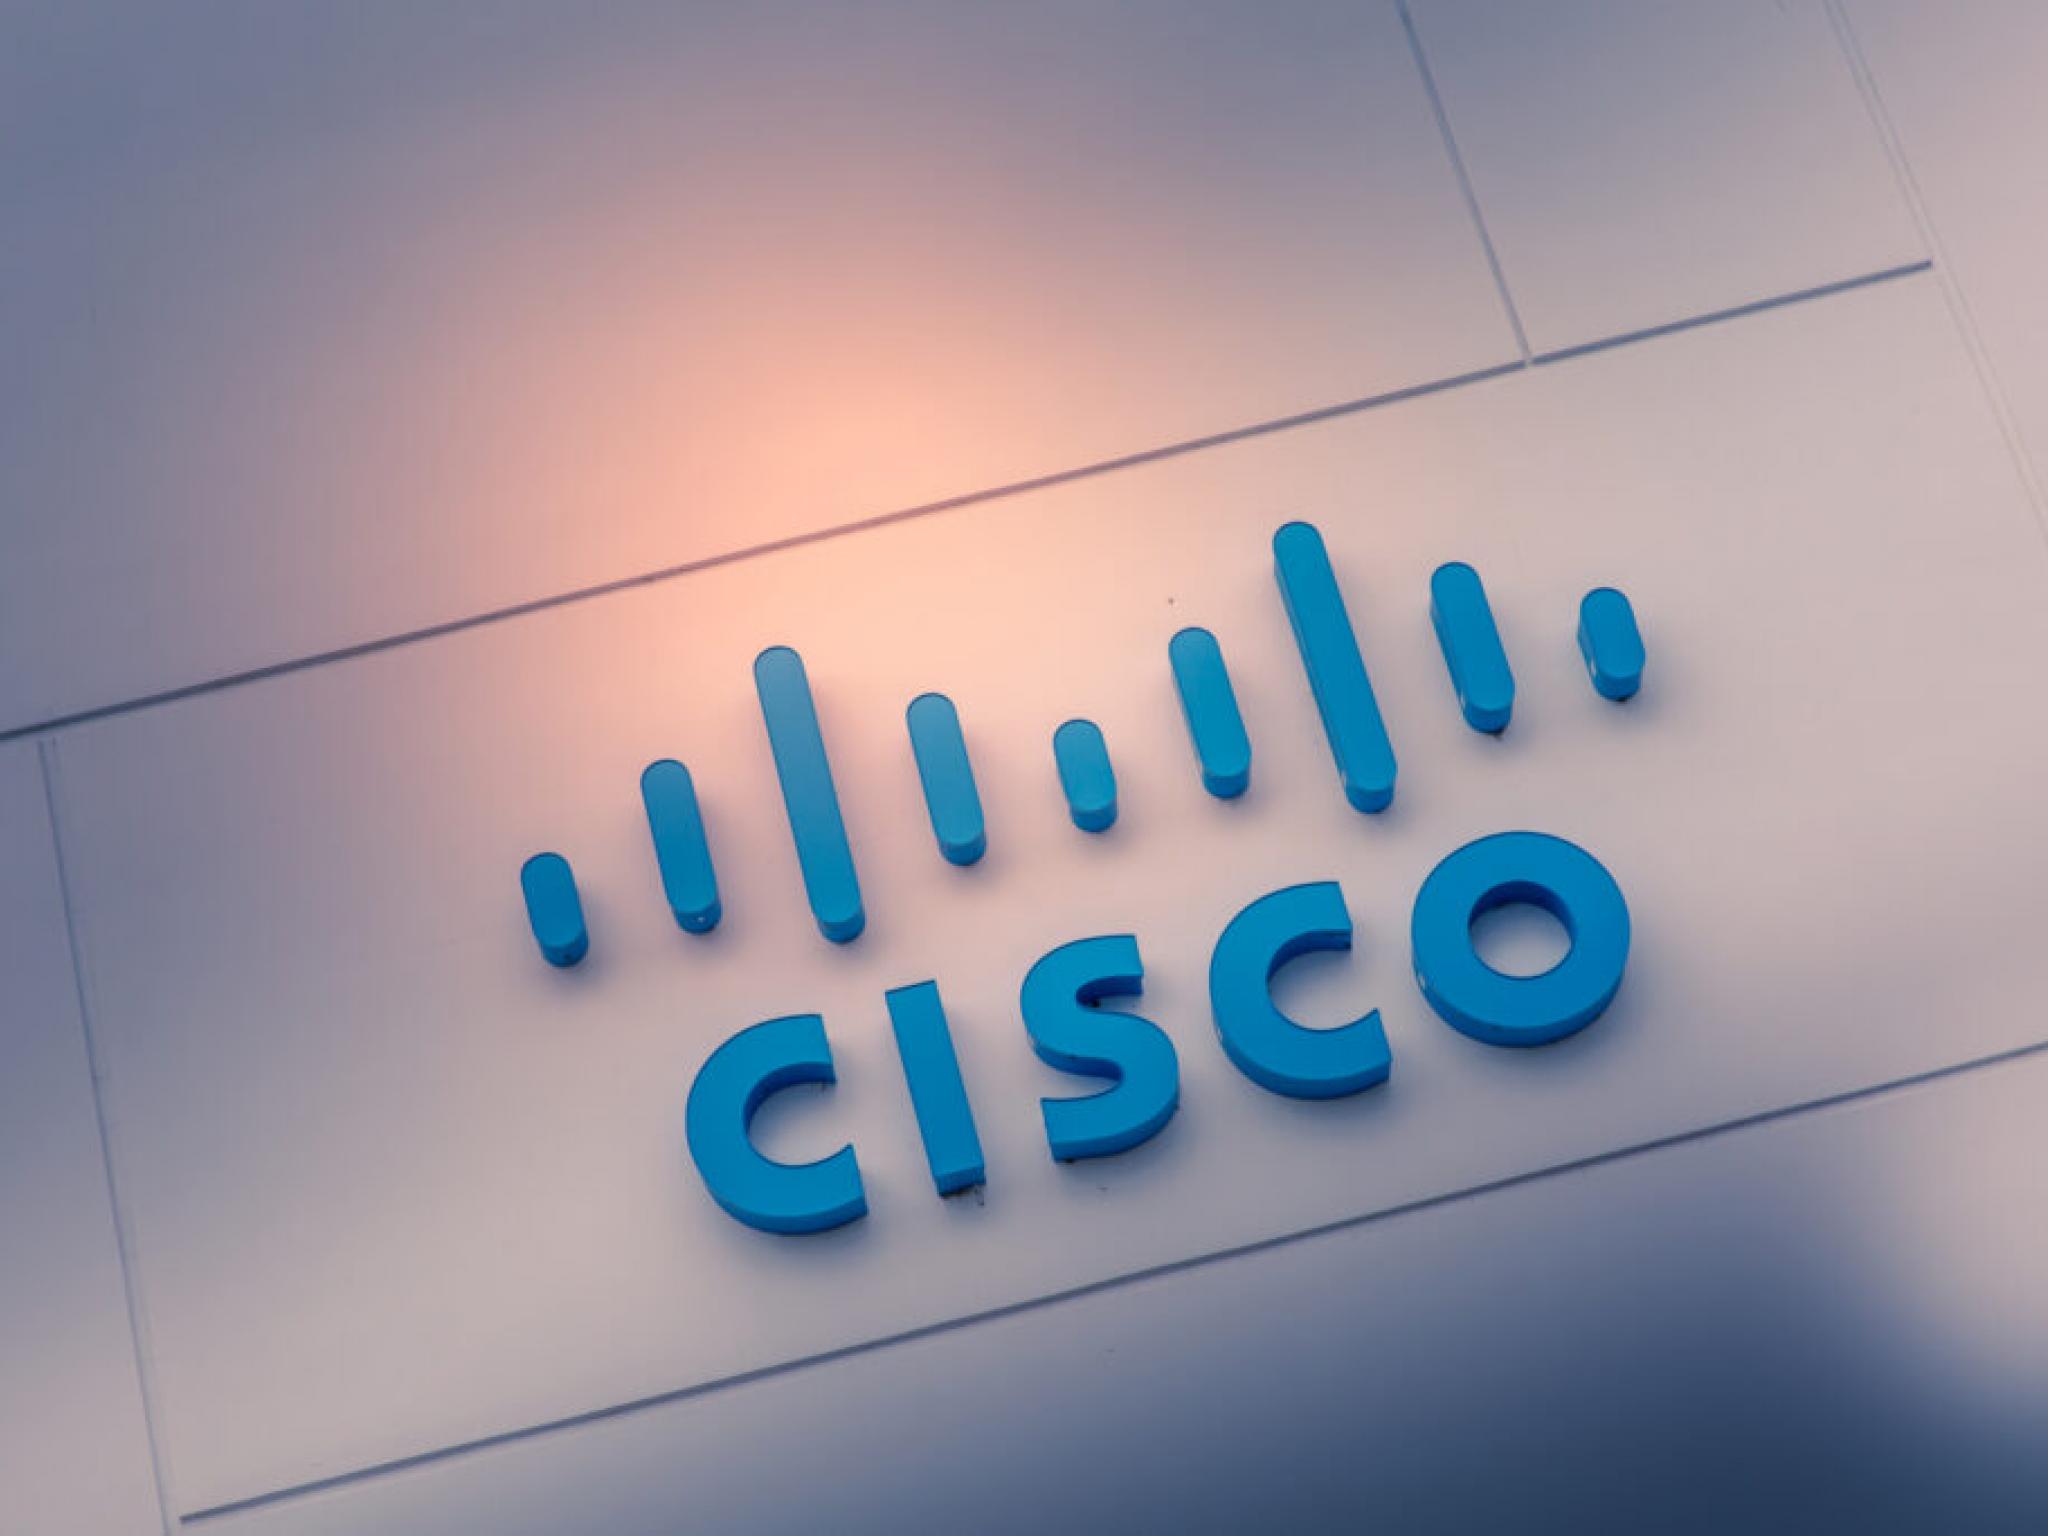  why-cisco-shares-are-trading-higher-here-are-20-stocks-moving-premarket 